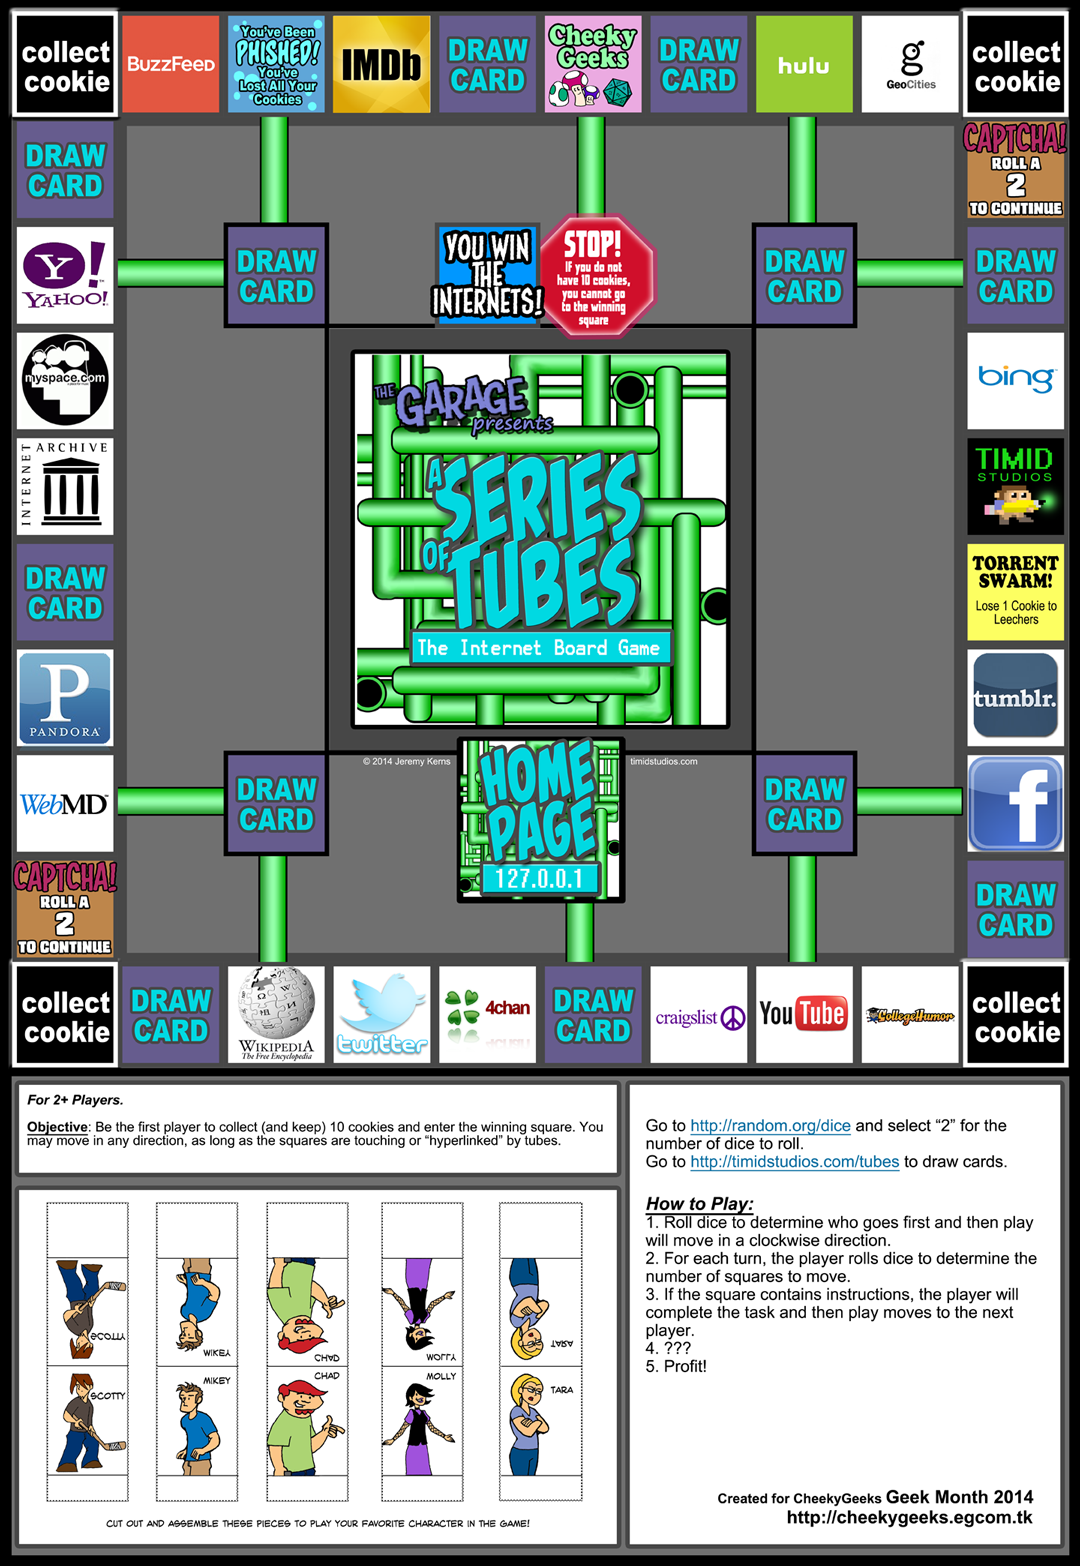 A Series of Tubes: The Internet Board Game